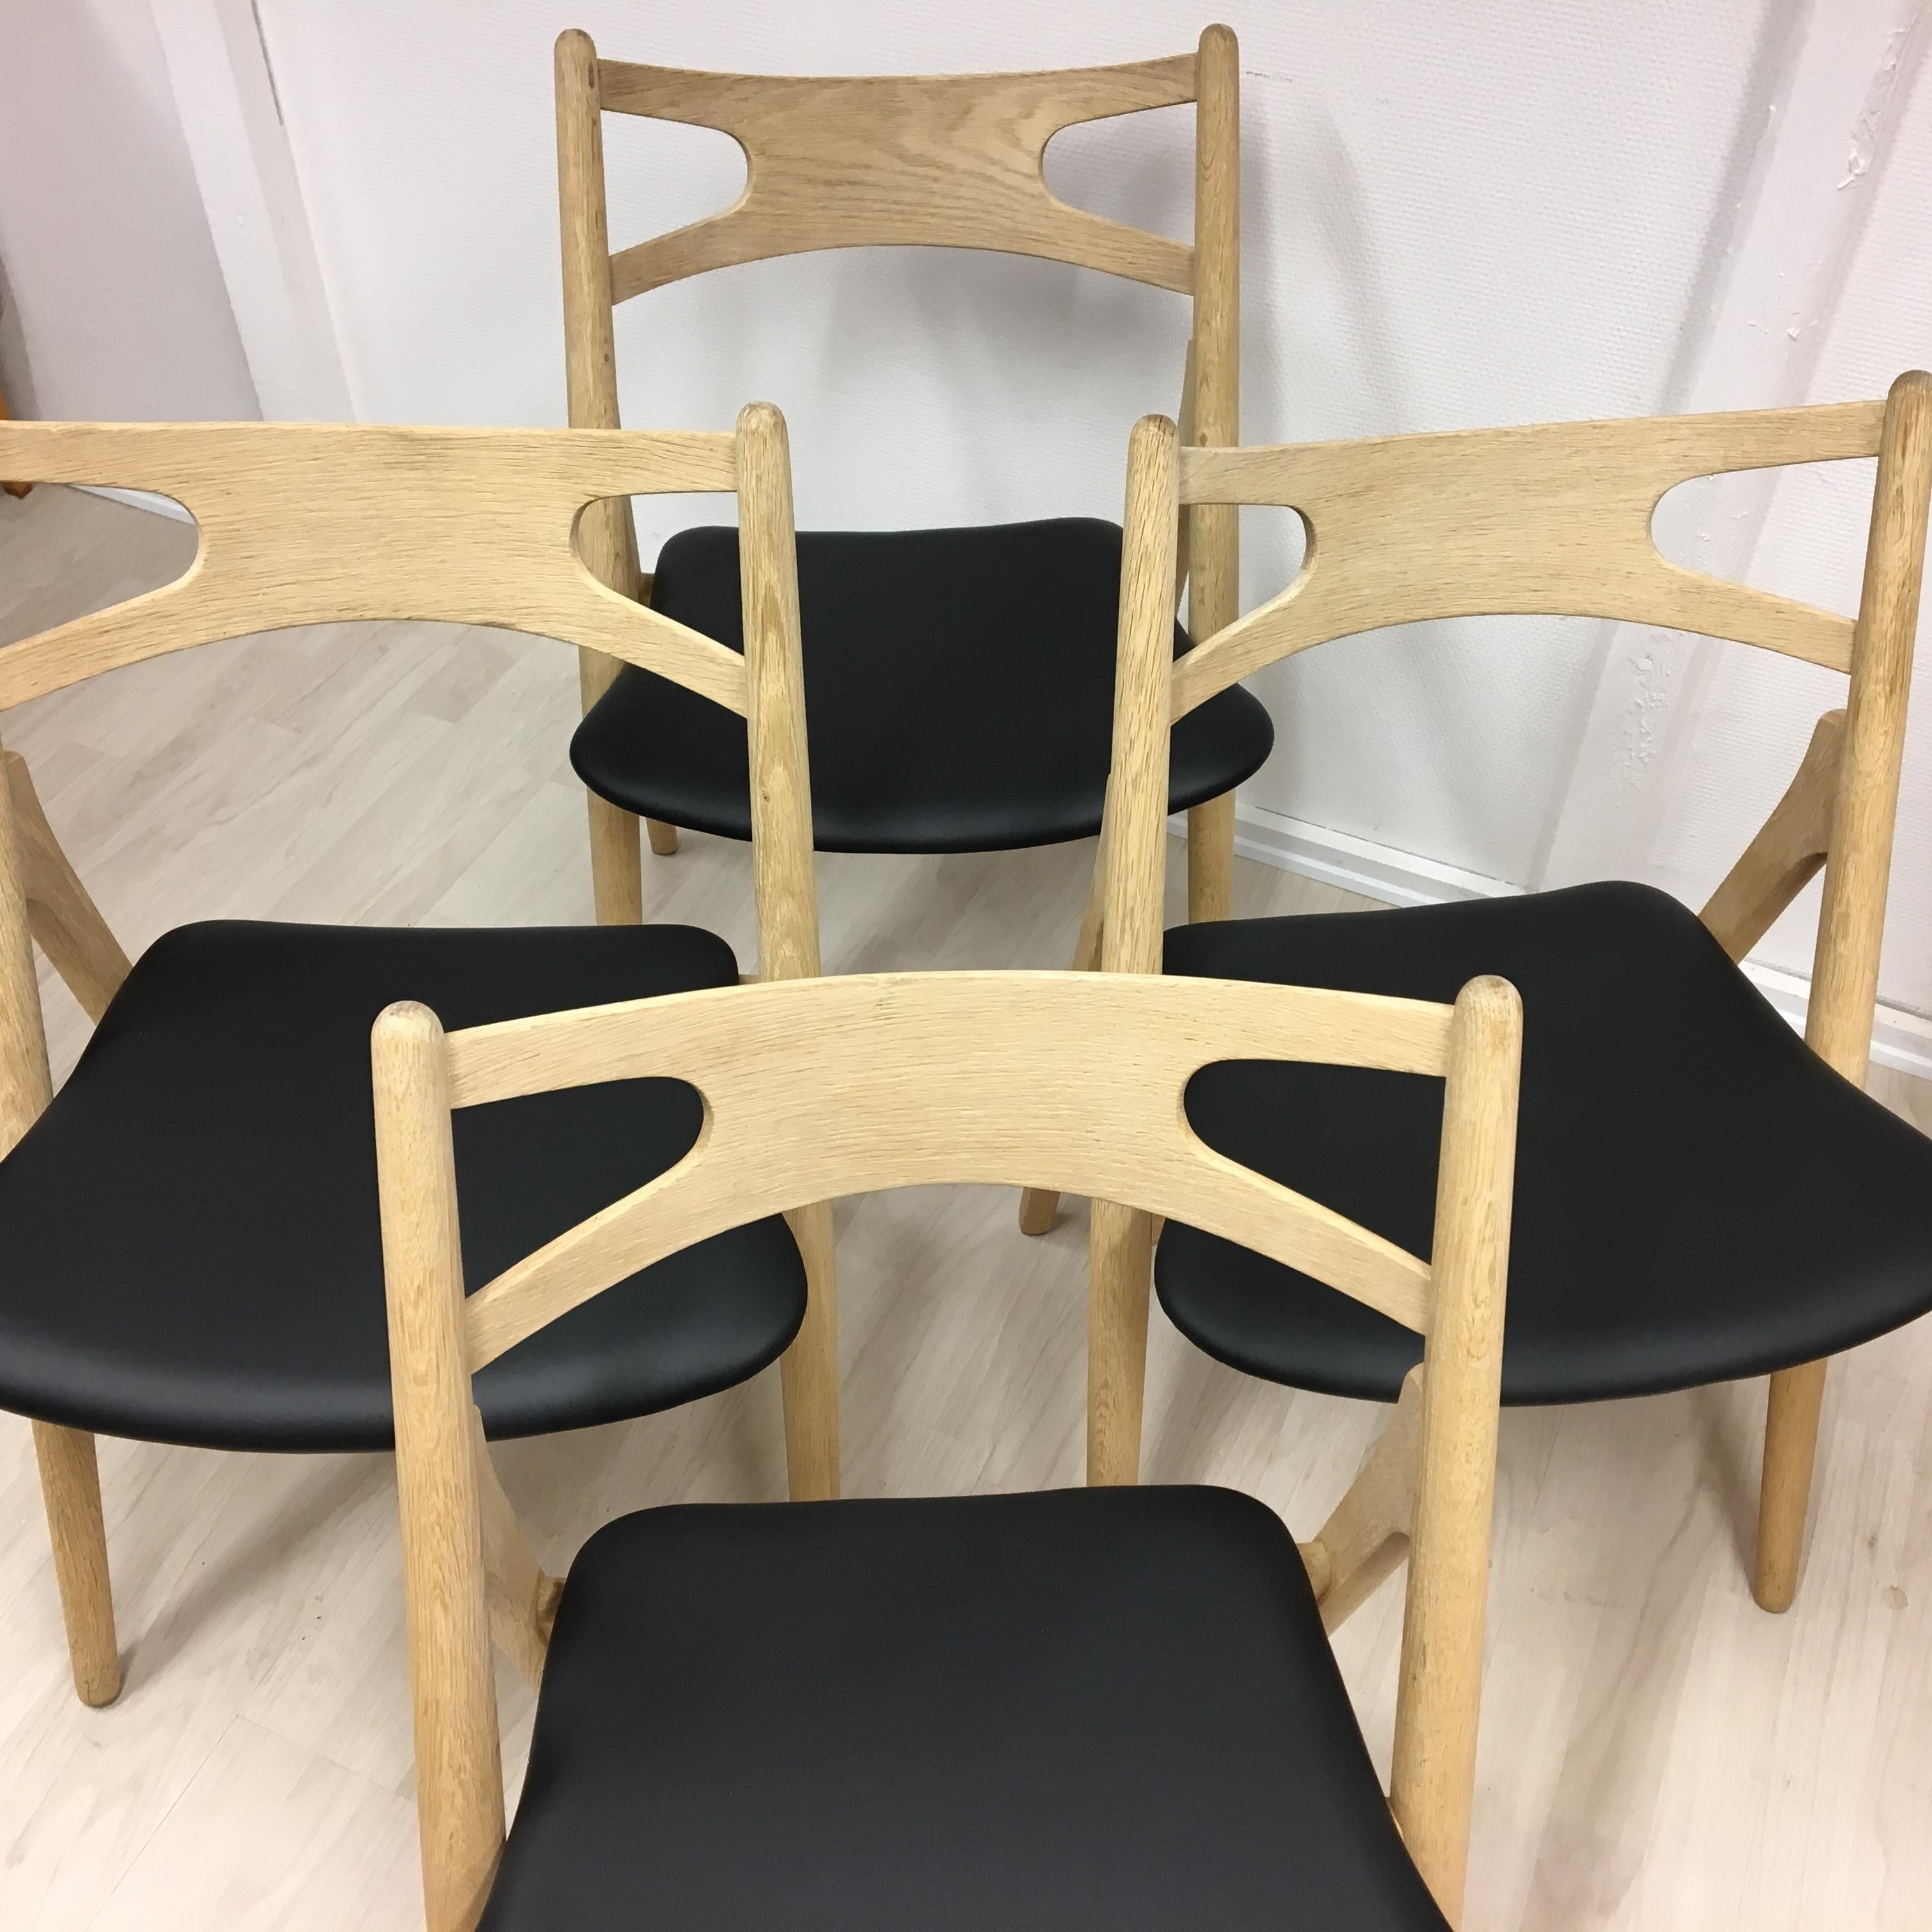 'Sawbuck' chairs CH-29 made in massive oak, by Hans J. Wegner made by Carl Hansen & Søn.
These chairs are cleaned, sanded and left in untreated condition.
Stands with new foam and padded with new black Savannah aniline leather, made by